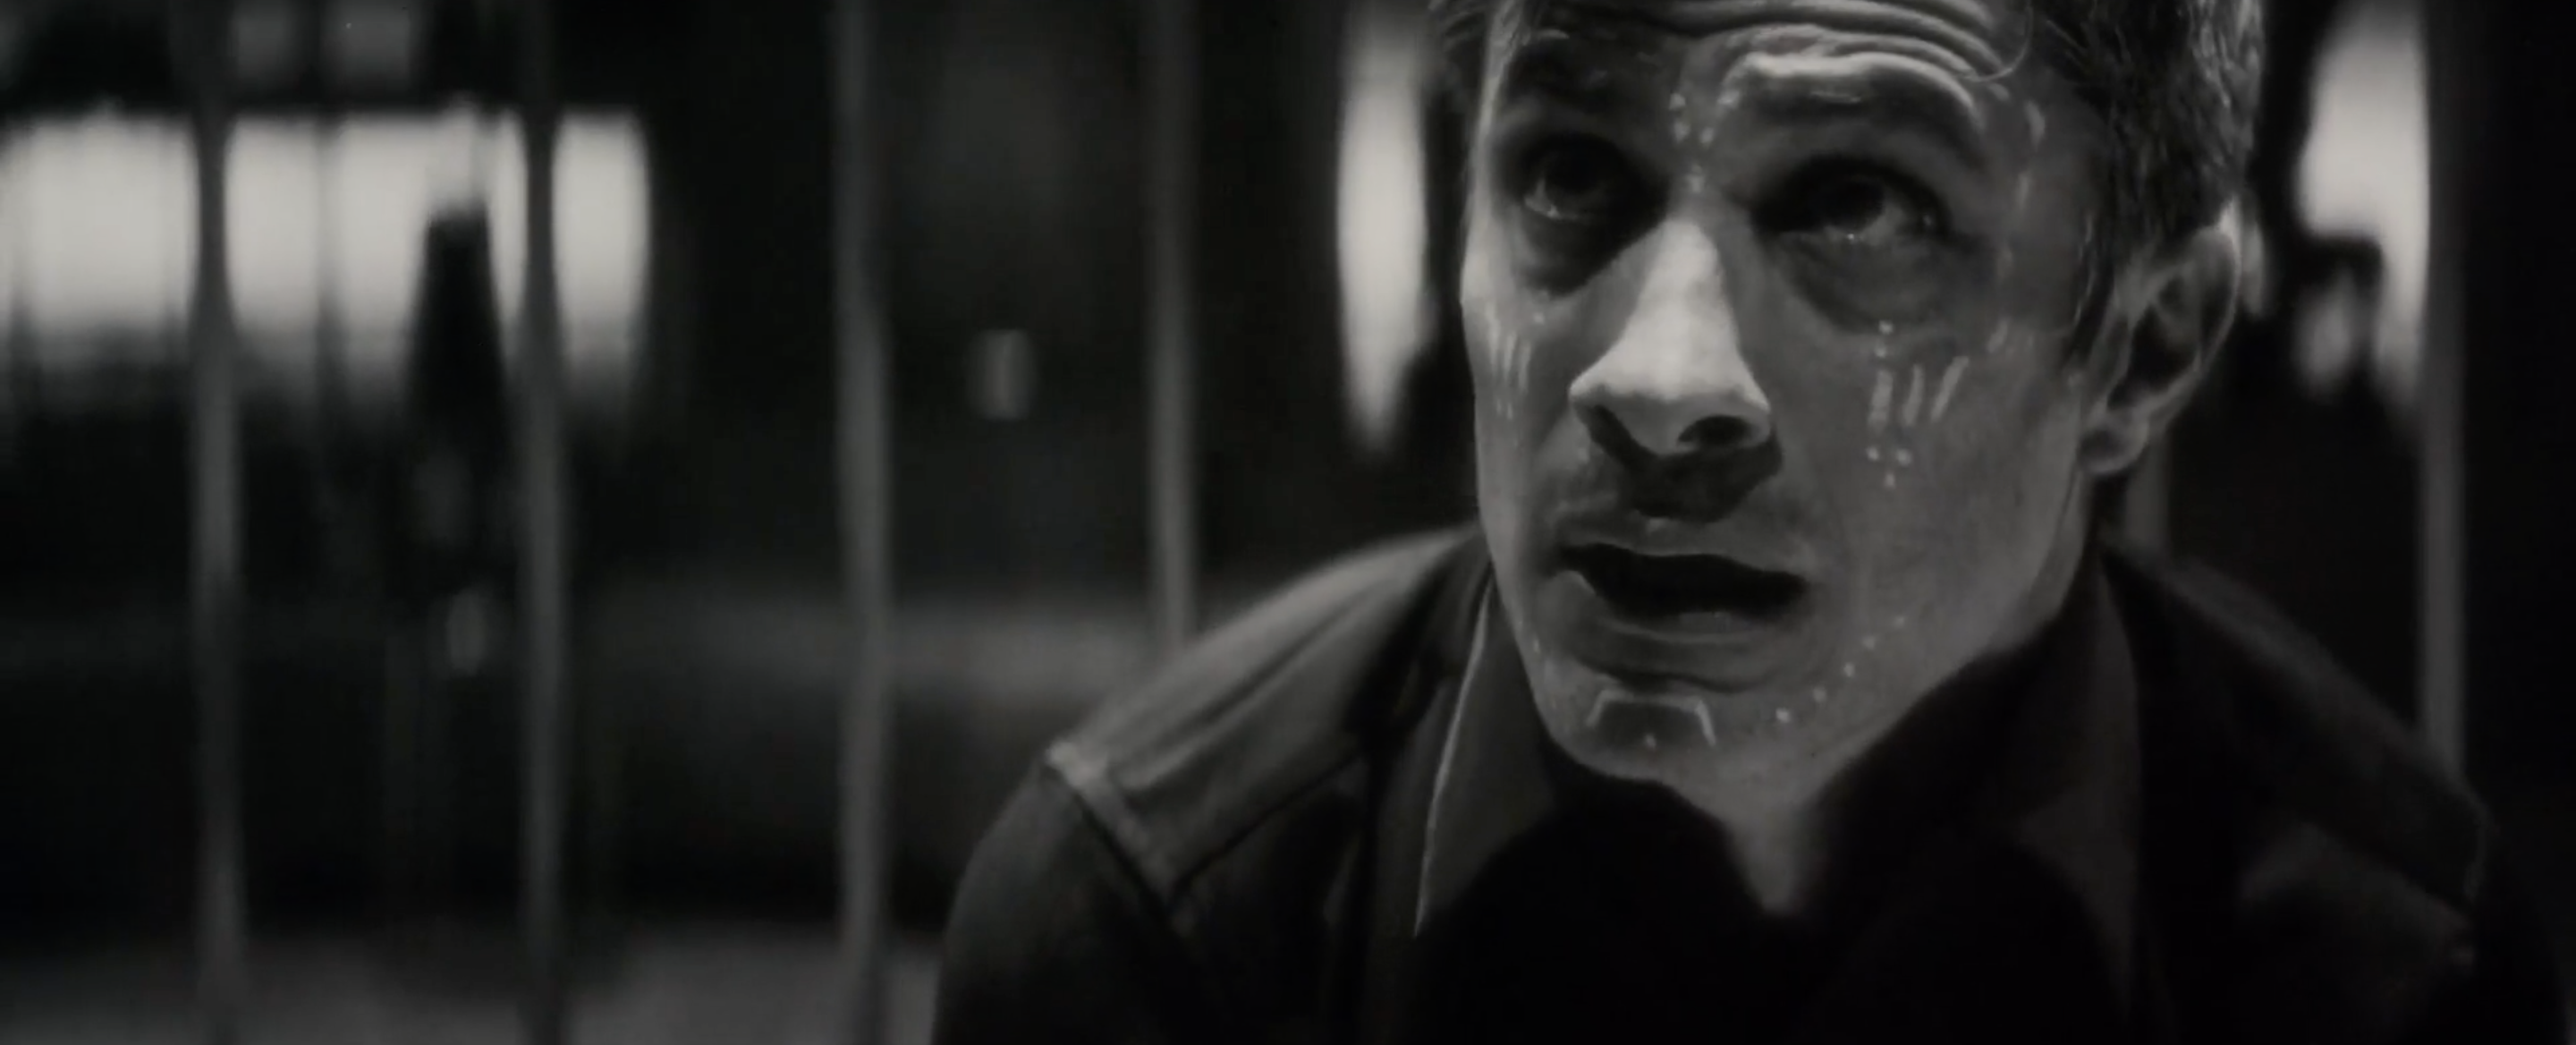 Werewolf By Night Trailer Brings Black-and-White Camp to the MCU